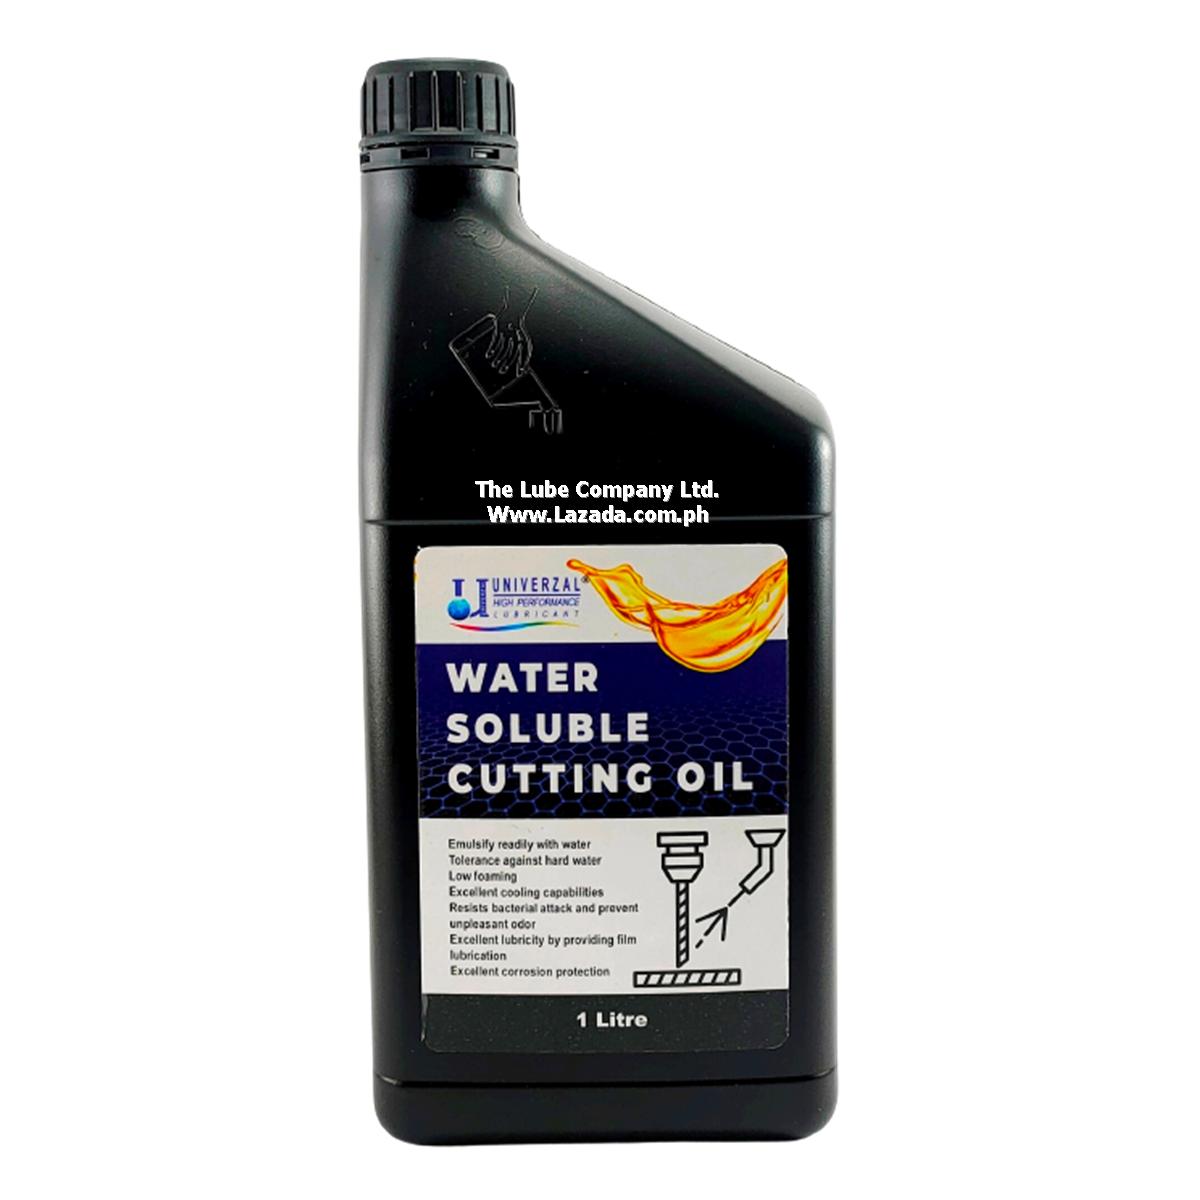 Cutting Oil Soluble Cutting Oil Liter Tapping Oil Water Based Cutting